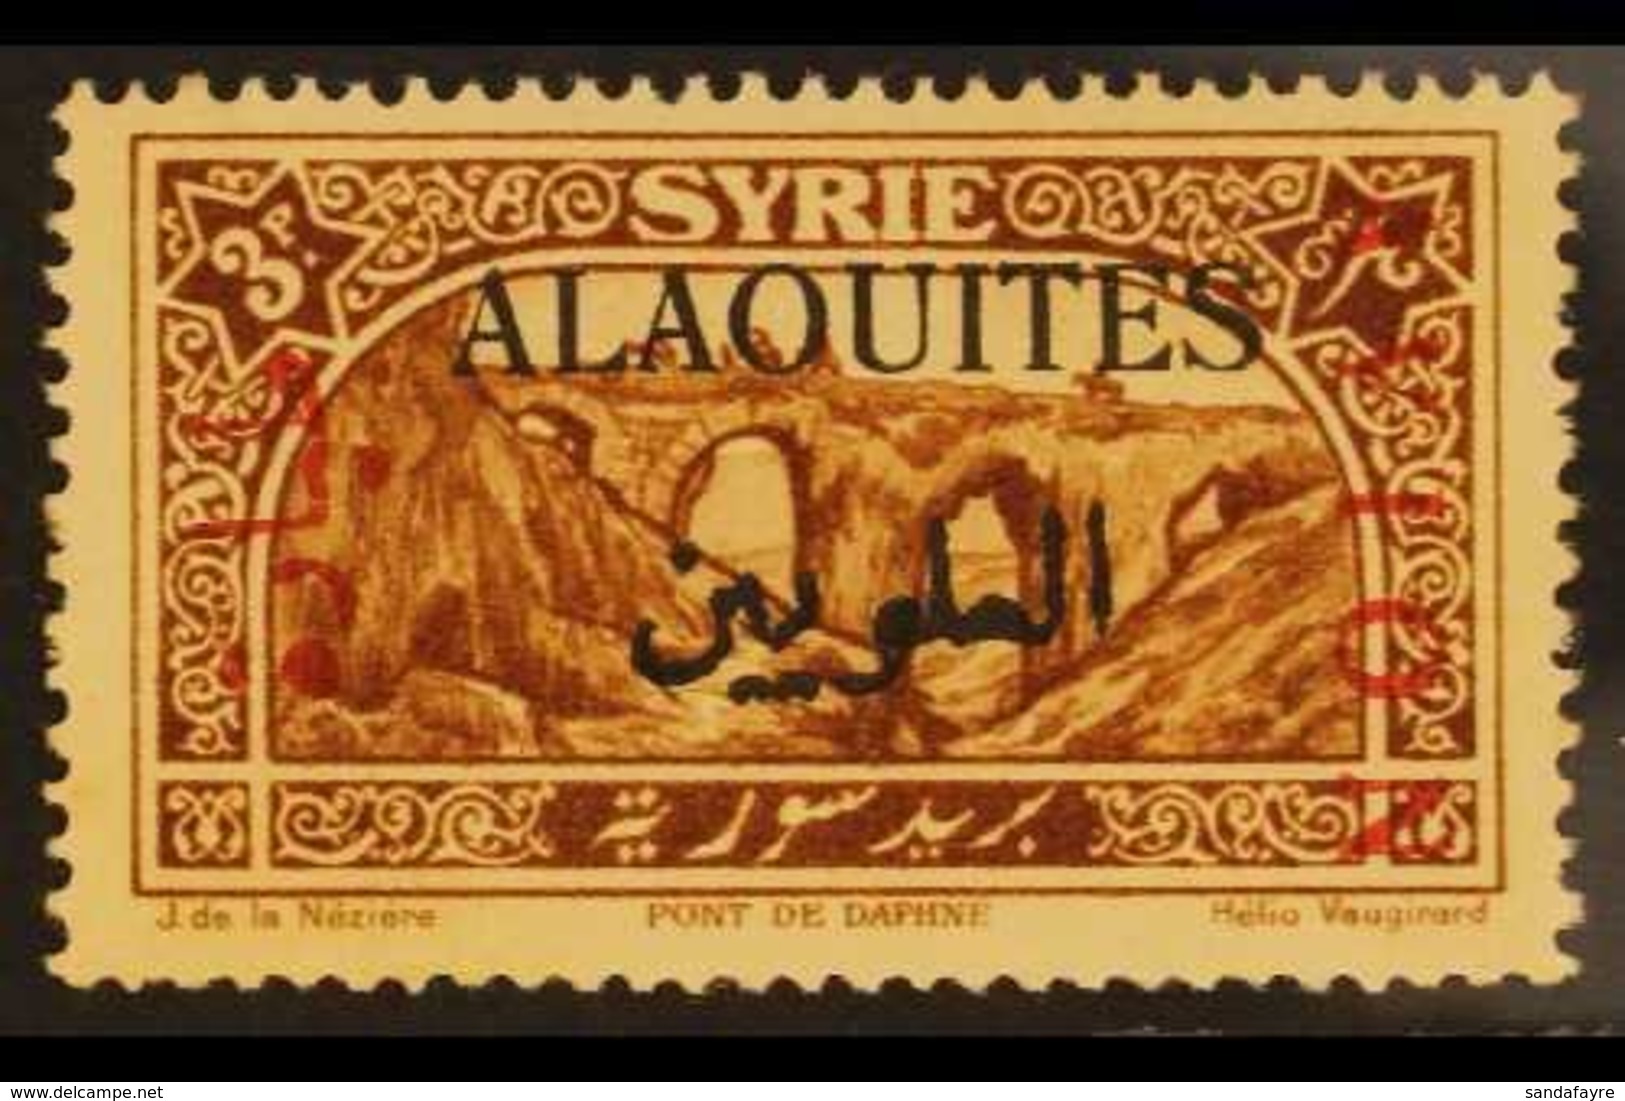 ALAOUITES 1925 3p Brown Airmail Ovptd In RED, Variety "surcharge Reversed" (Avion At Right), Yv PA6 Var, Vf Never Hinged - Syrië